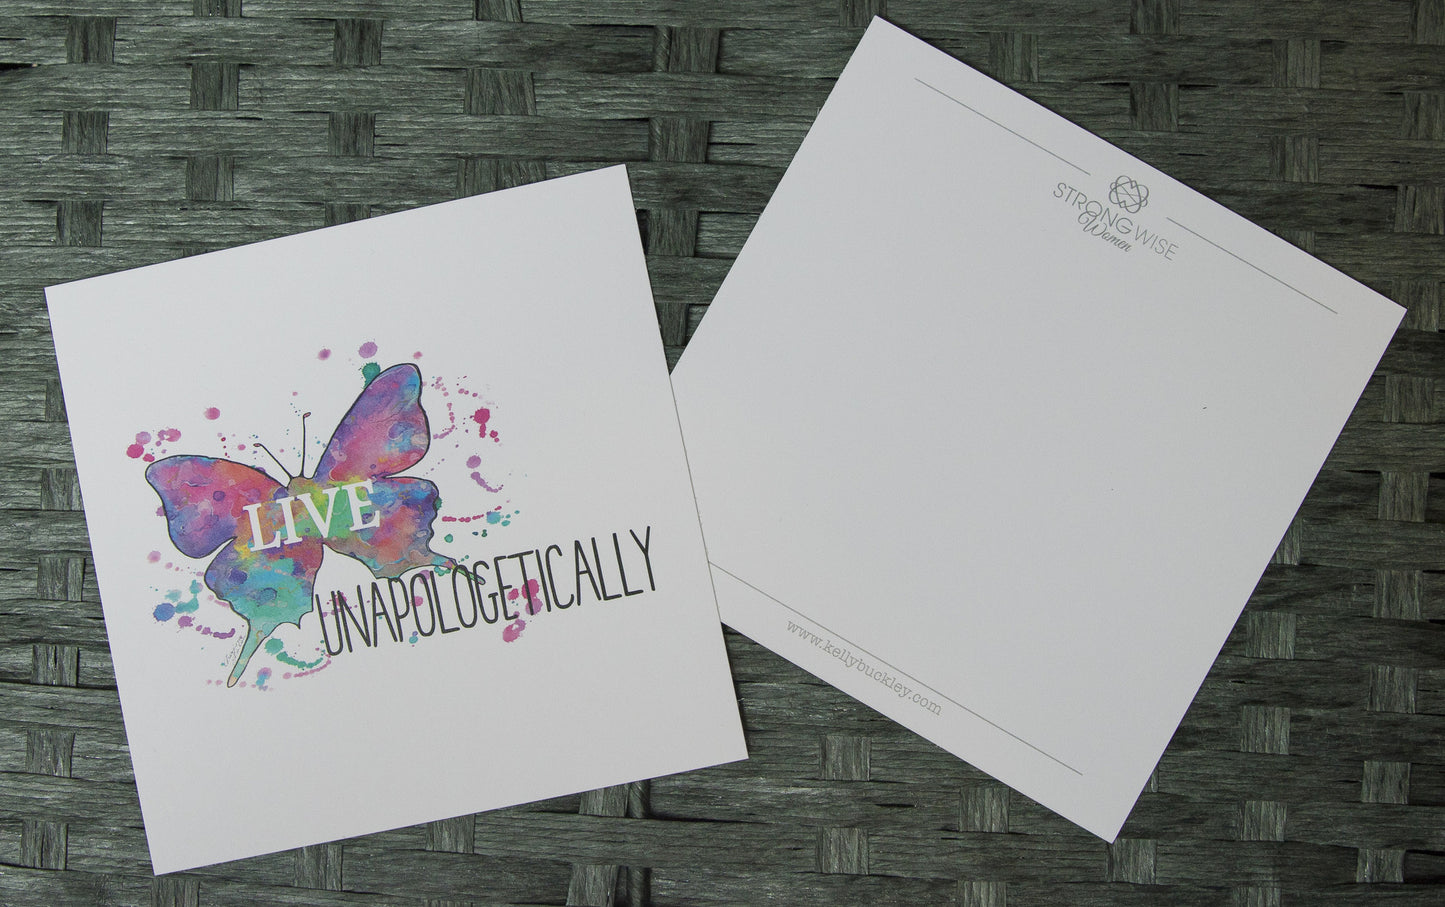 Live Unapologetically Note Card